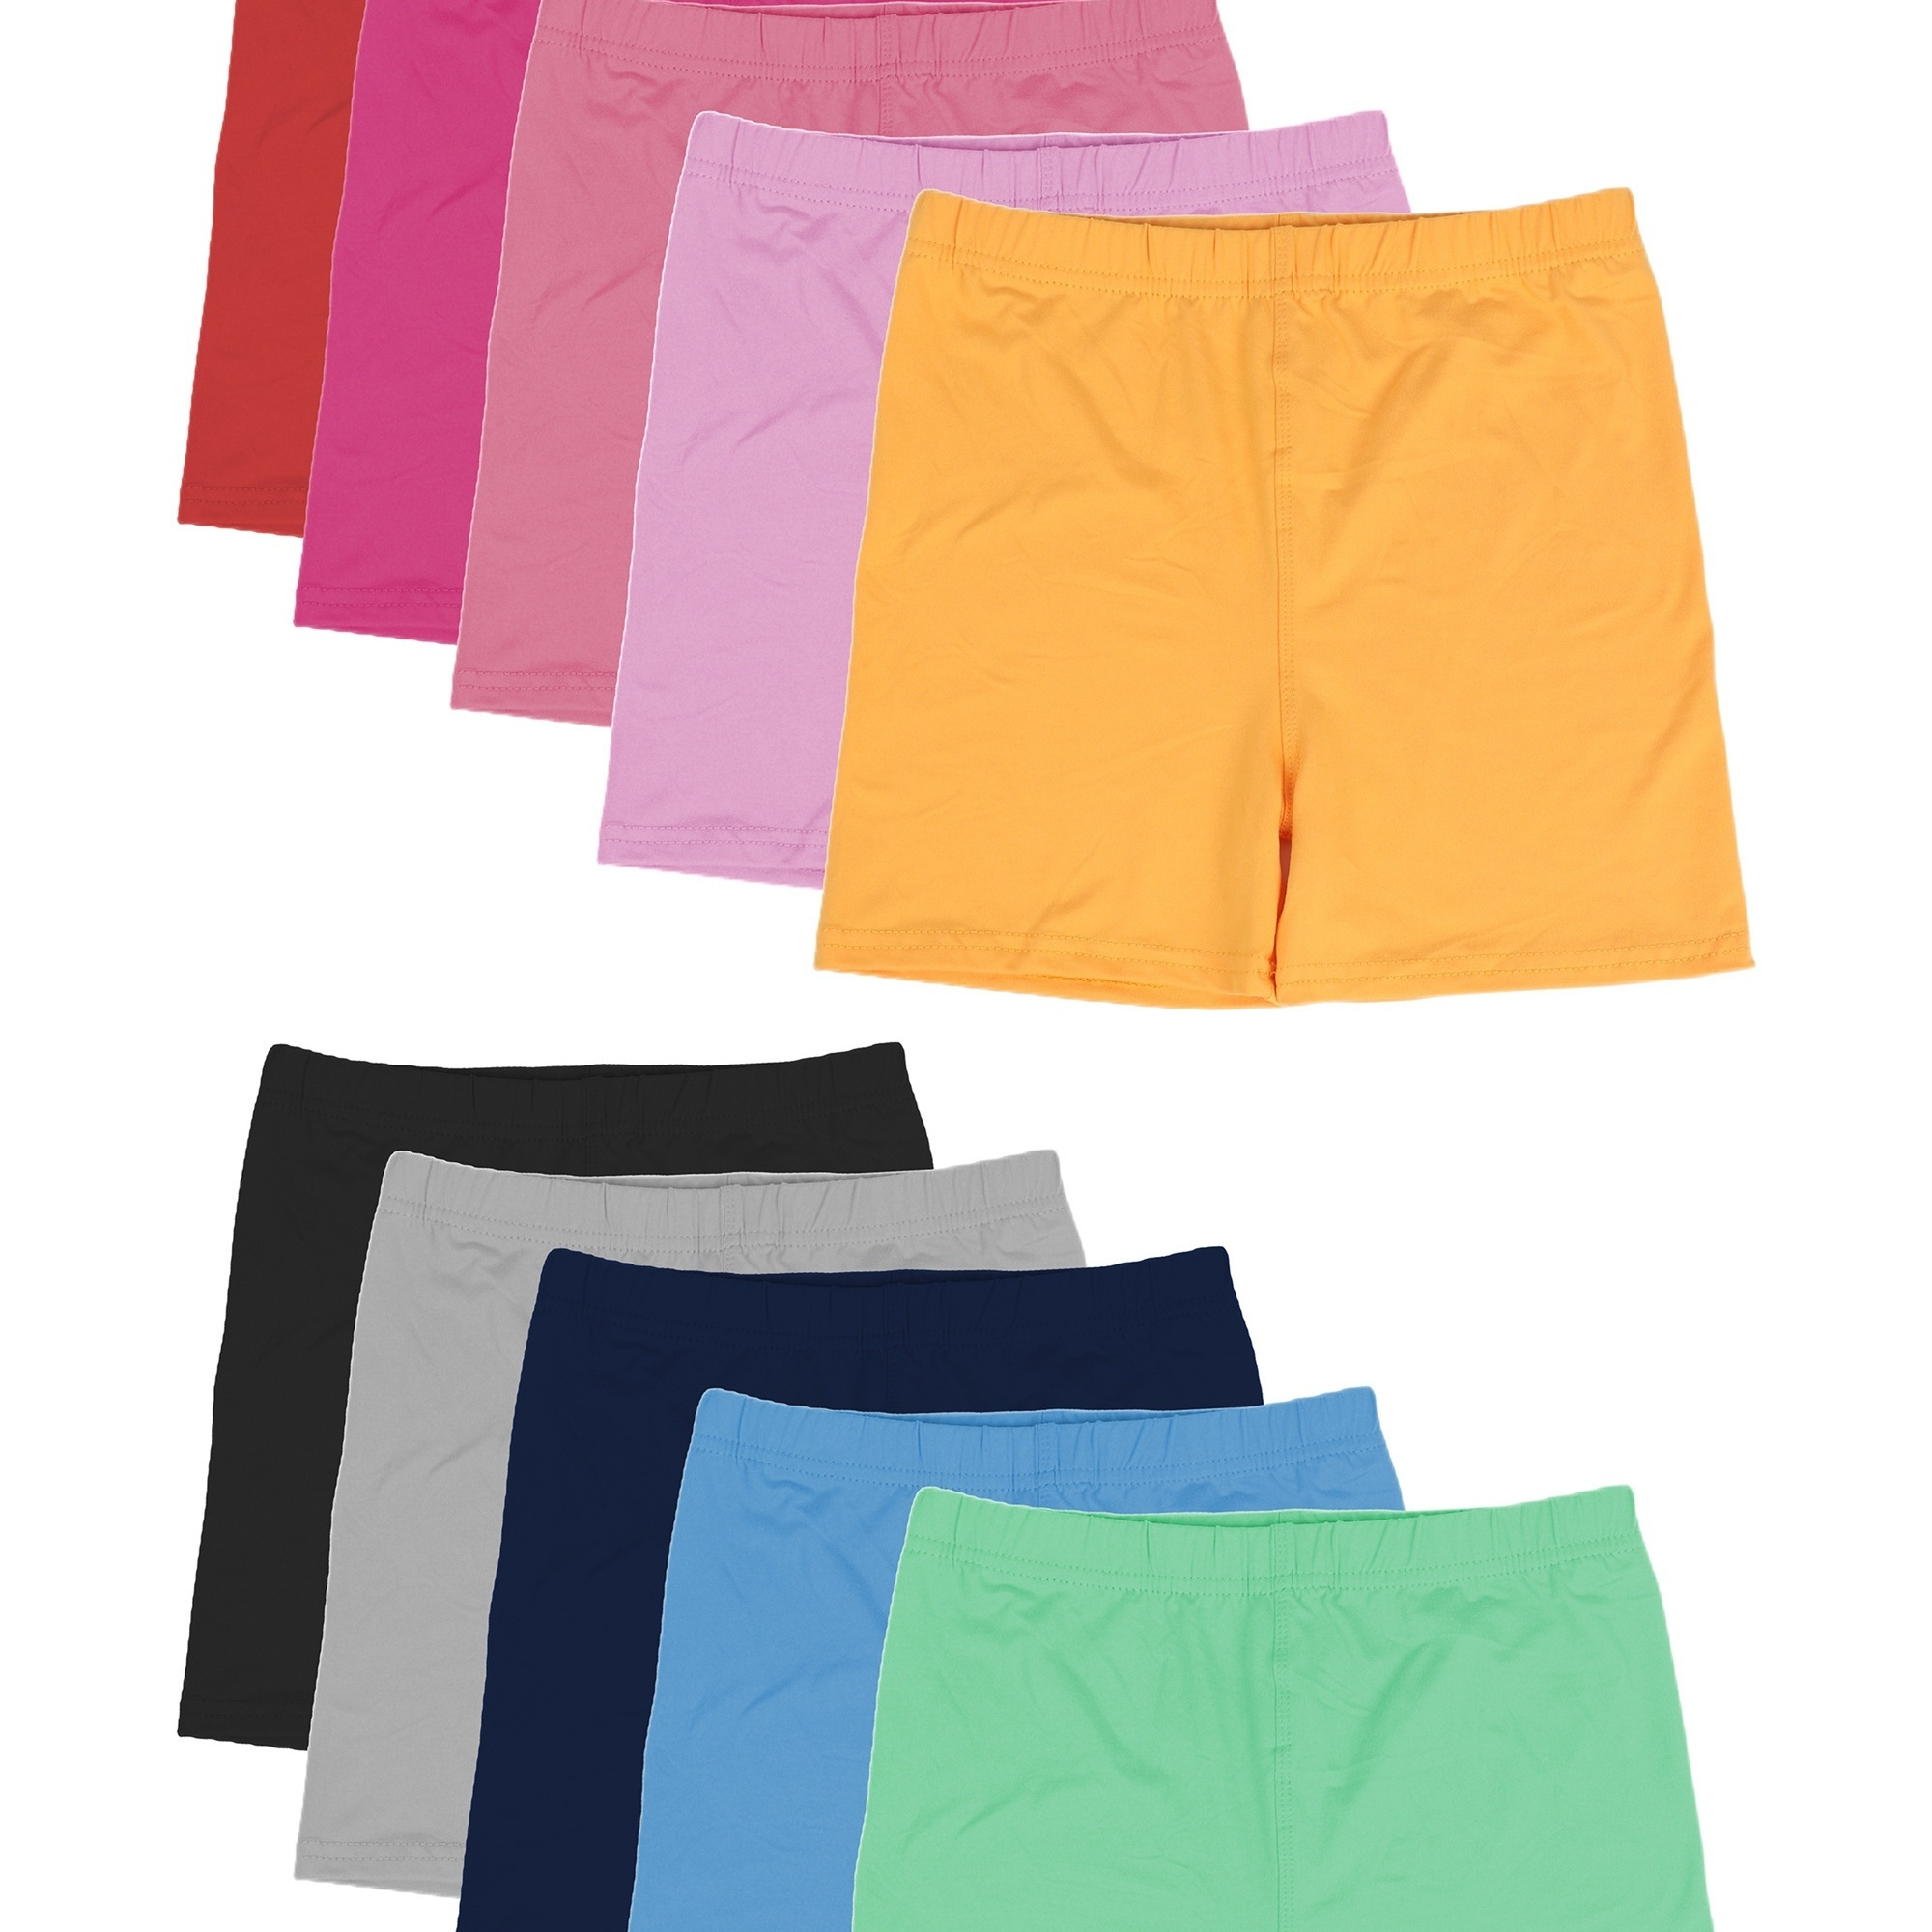 

10 Pieces Girls Shorts Dance Shorts Bike Shorts Stretch Comfortable And Safety Shorts For Kids